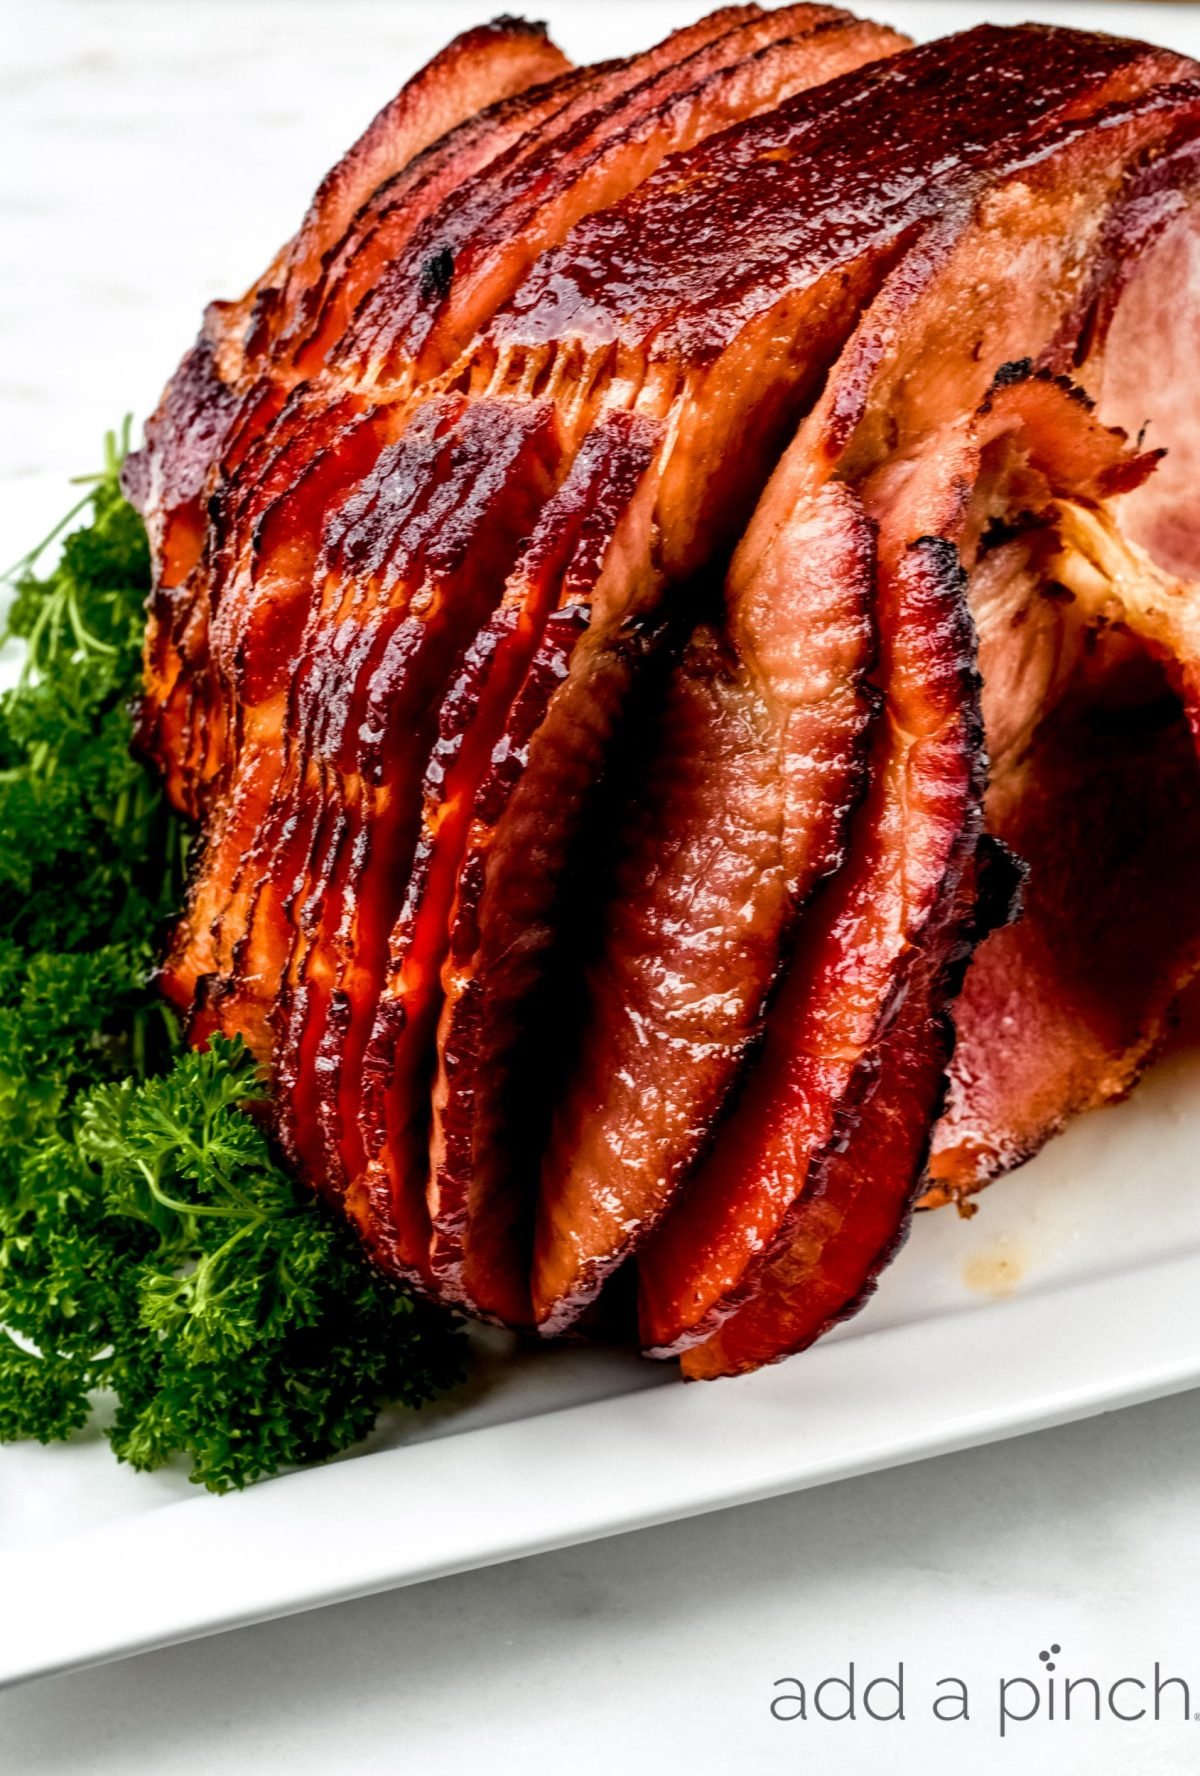 Photo of baked ham spiral sliced with gree parsley on white plate.